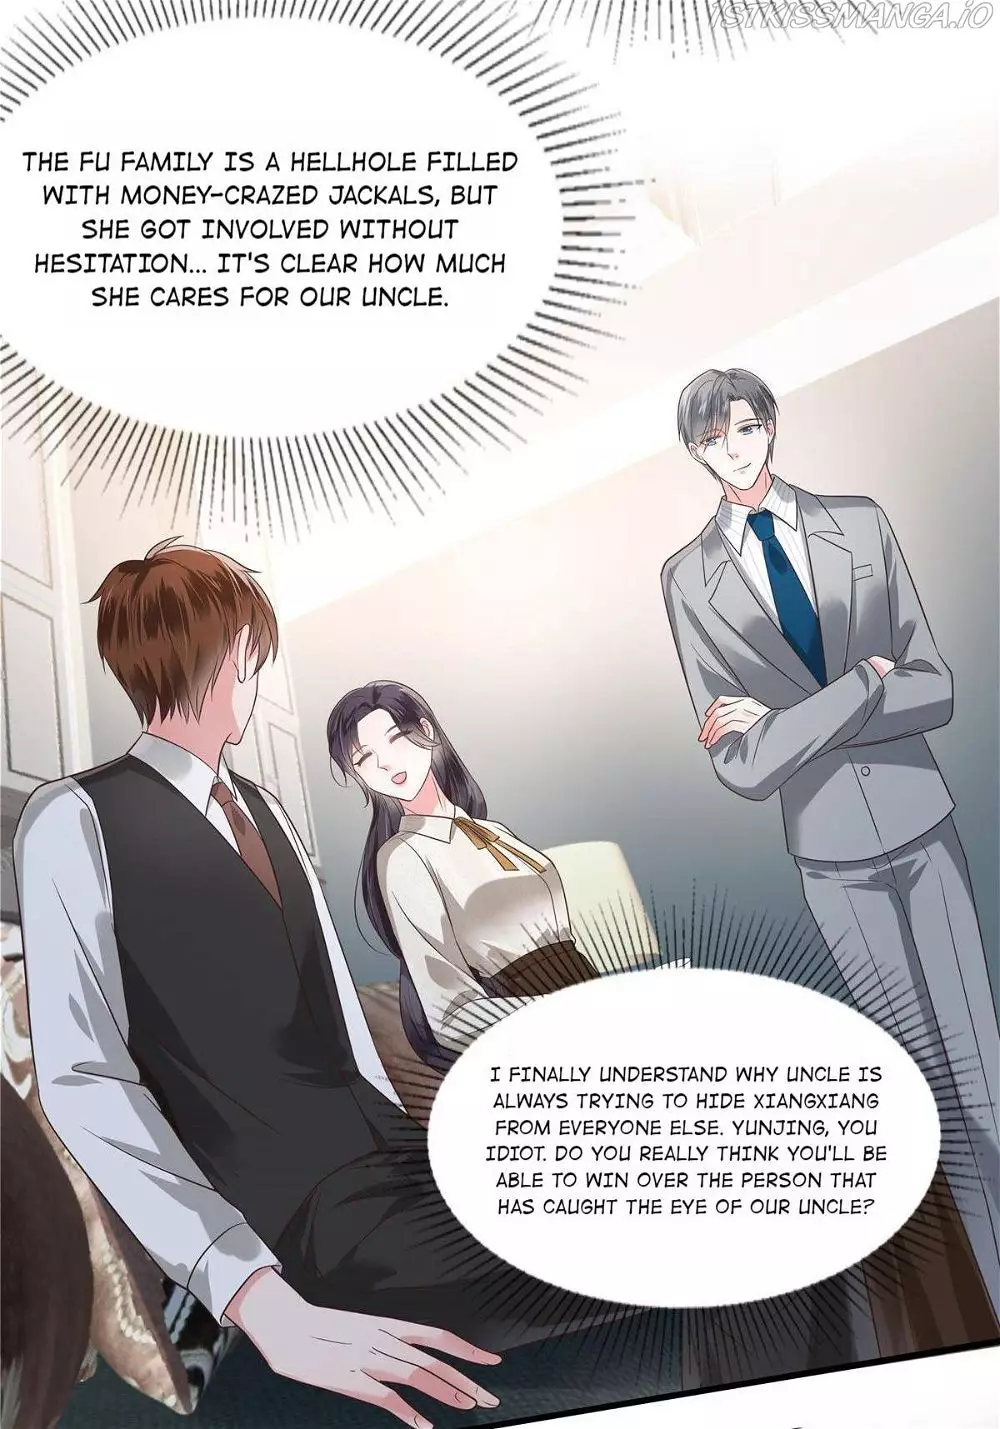 Rebirth Meeting: For You And My Exclusive Lovers - 164 page 7-993a3d91